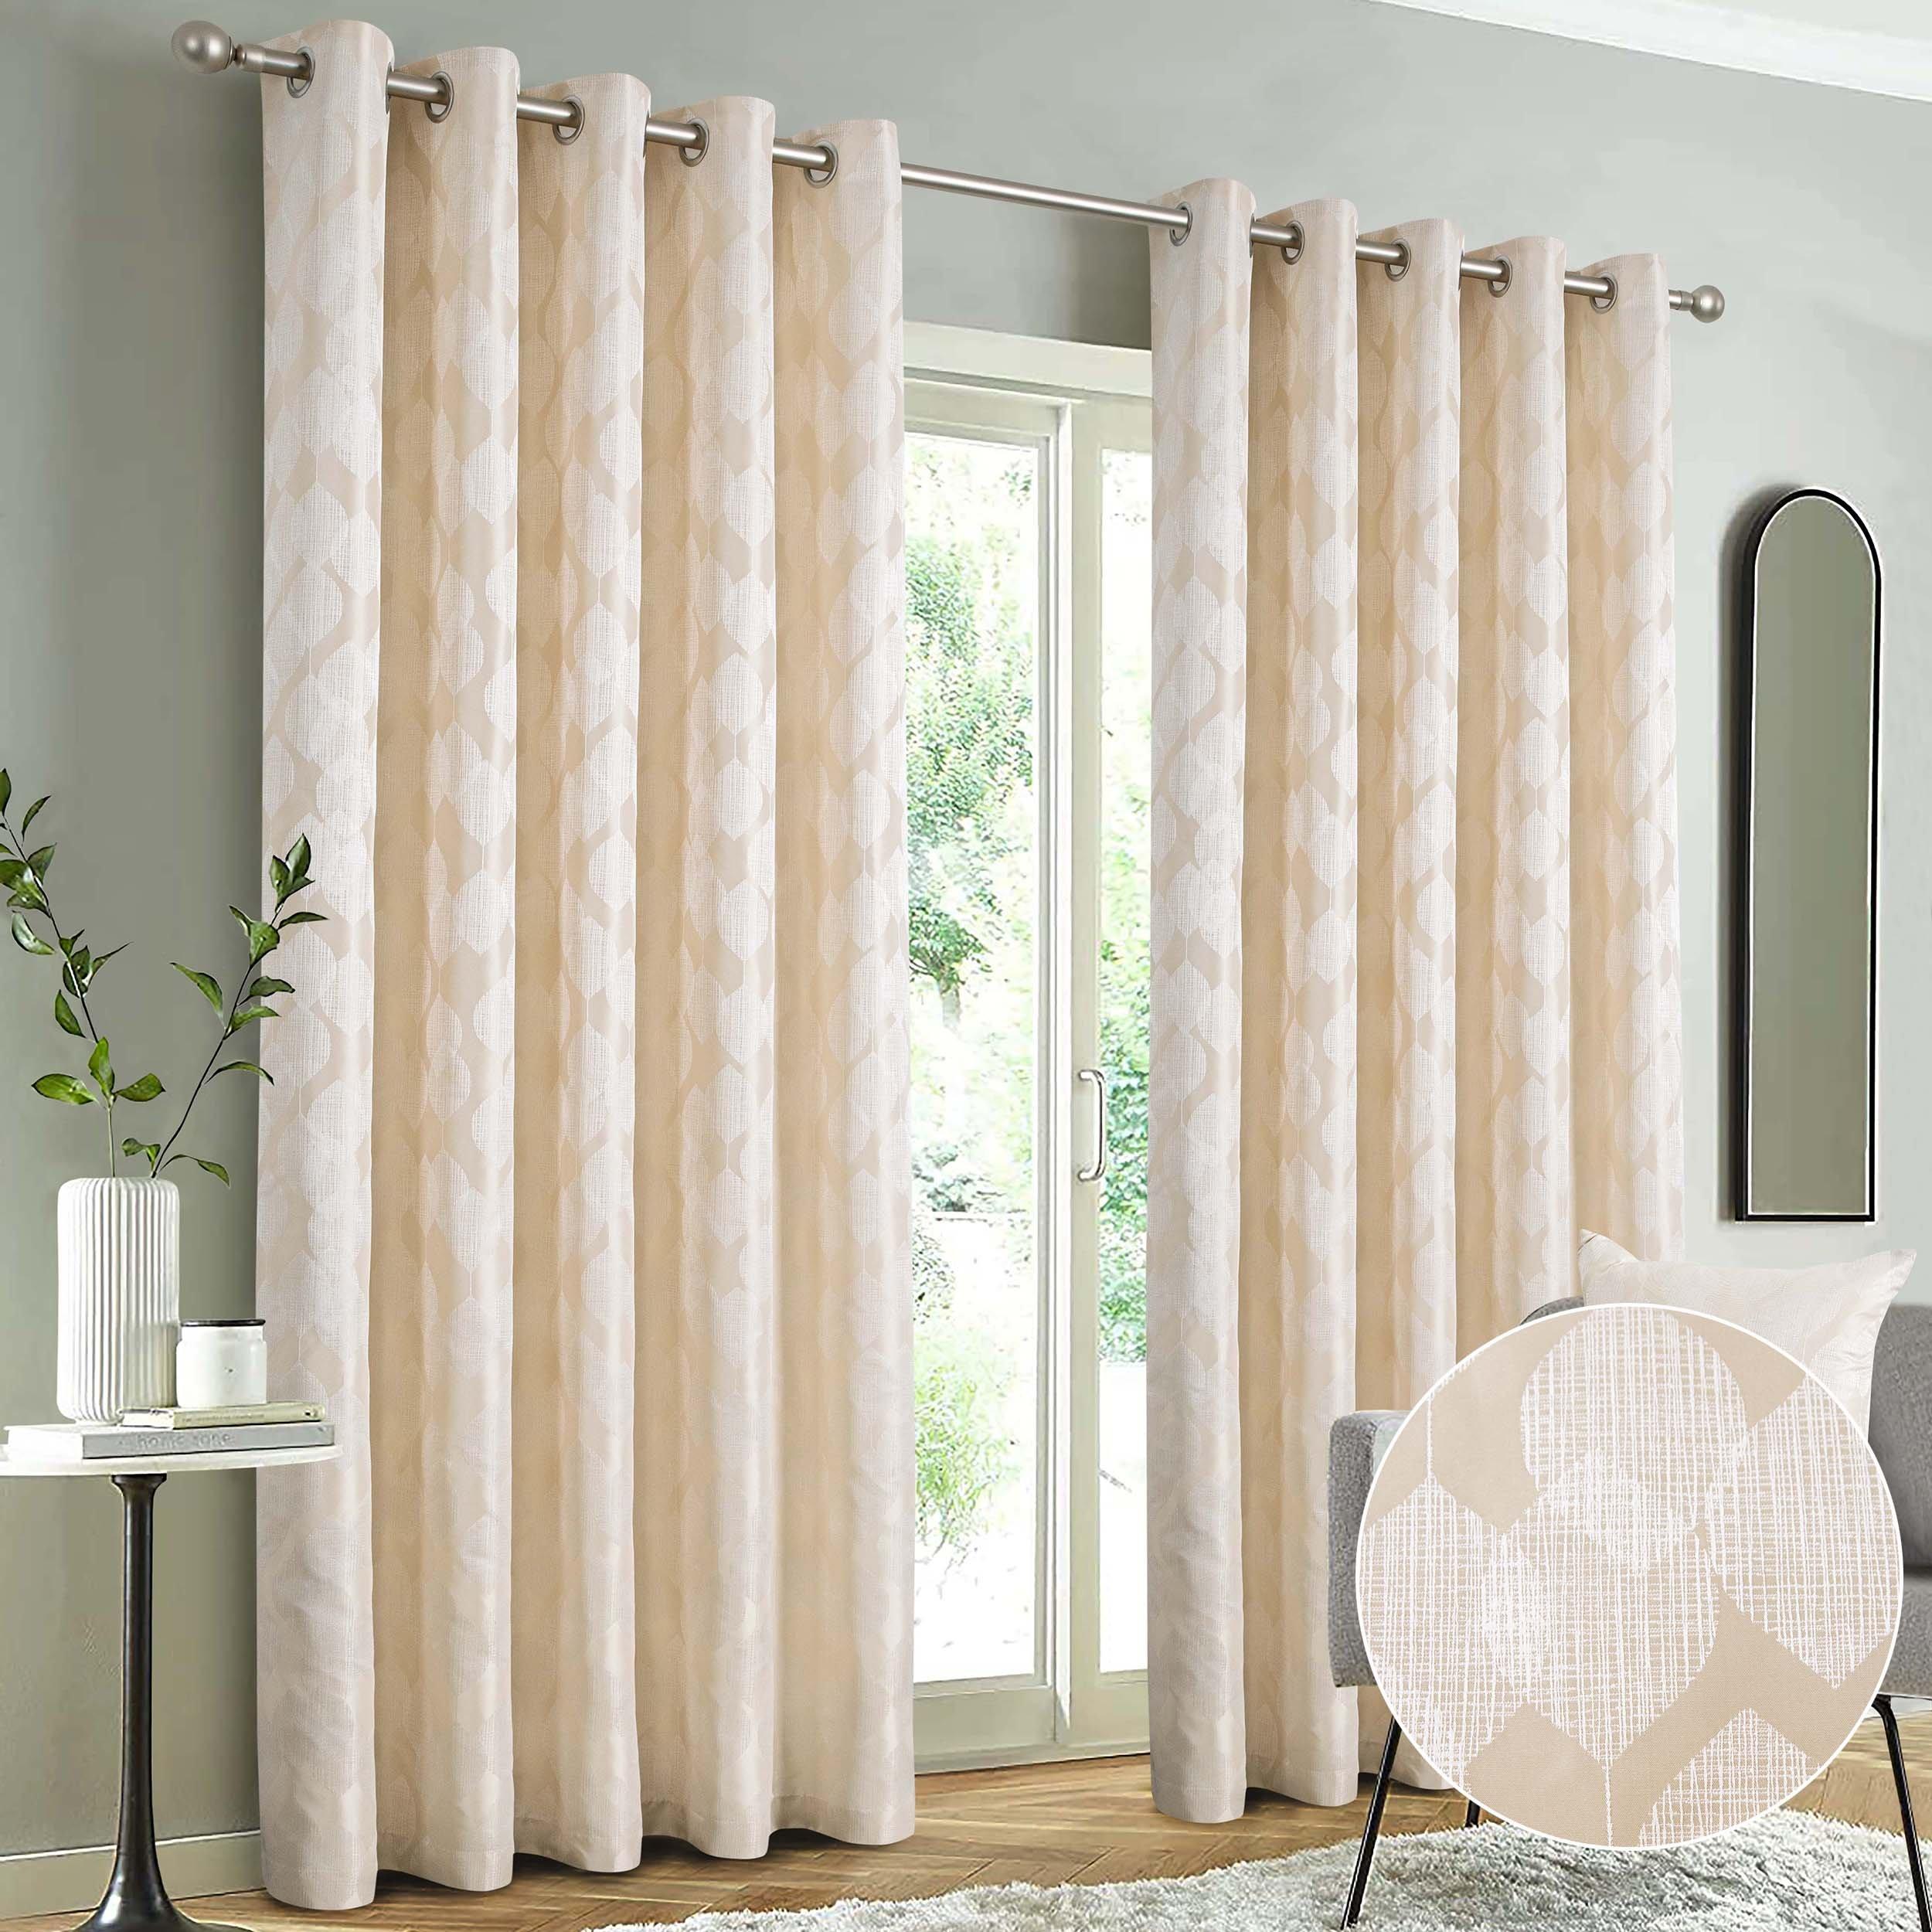 Halo Fully Lined Eyelet Curtains pair